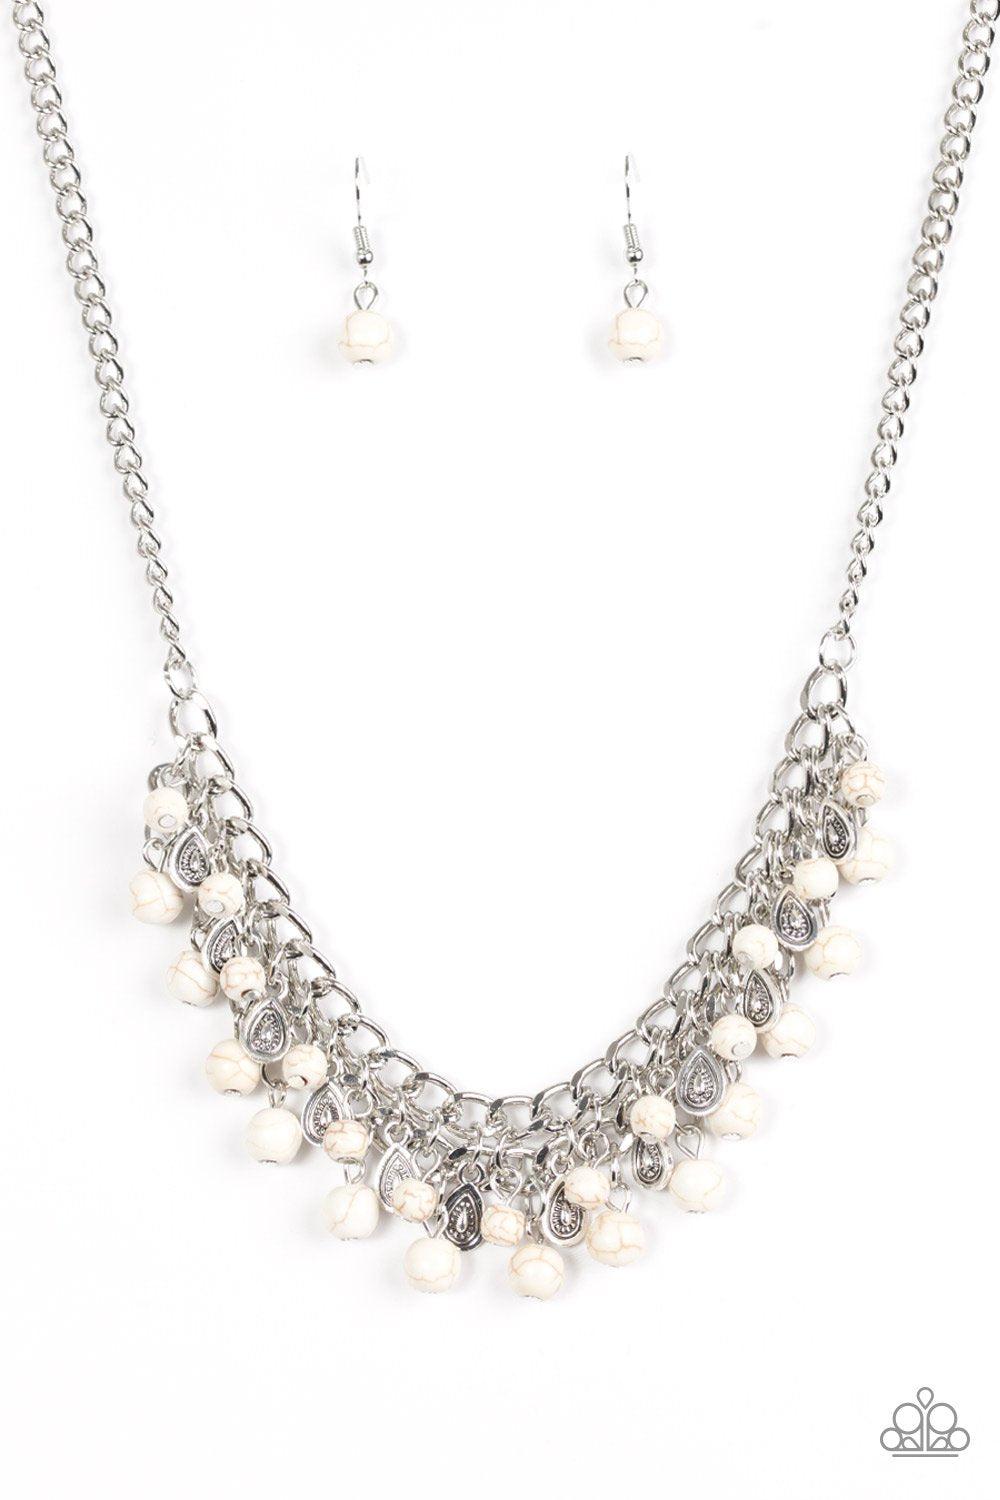 Poshly Paleo White Stone and Silver Necklace - Paparazzi Accessories - lightbox -CarasShop.com - $5 Jewelry by Cara Jewels